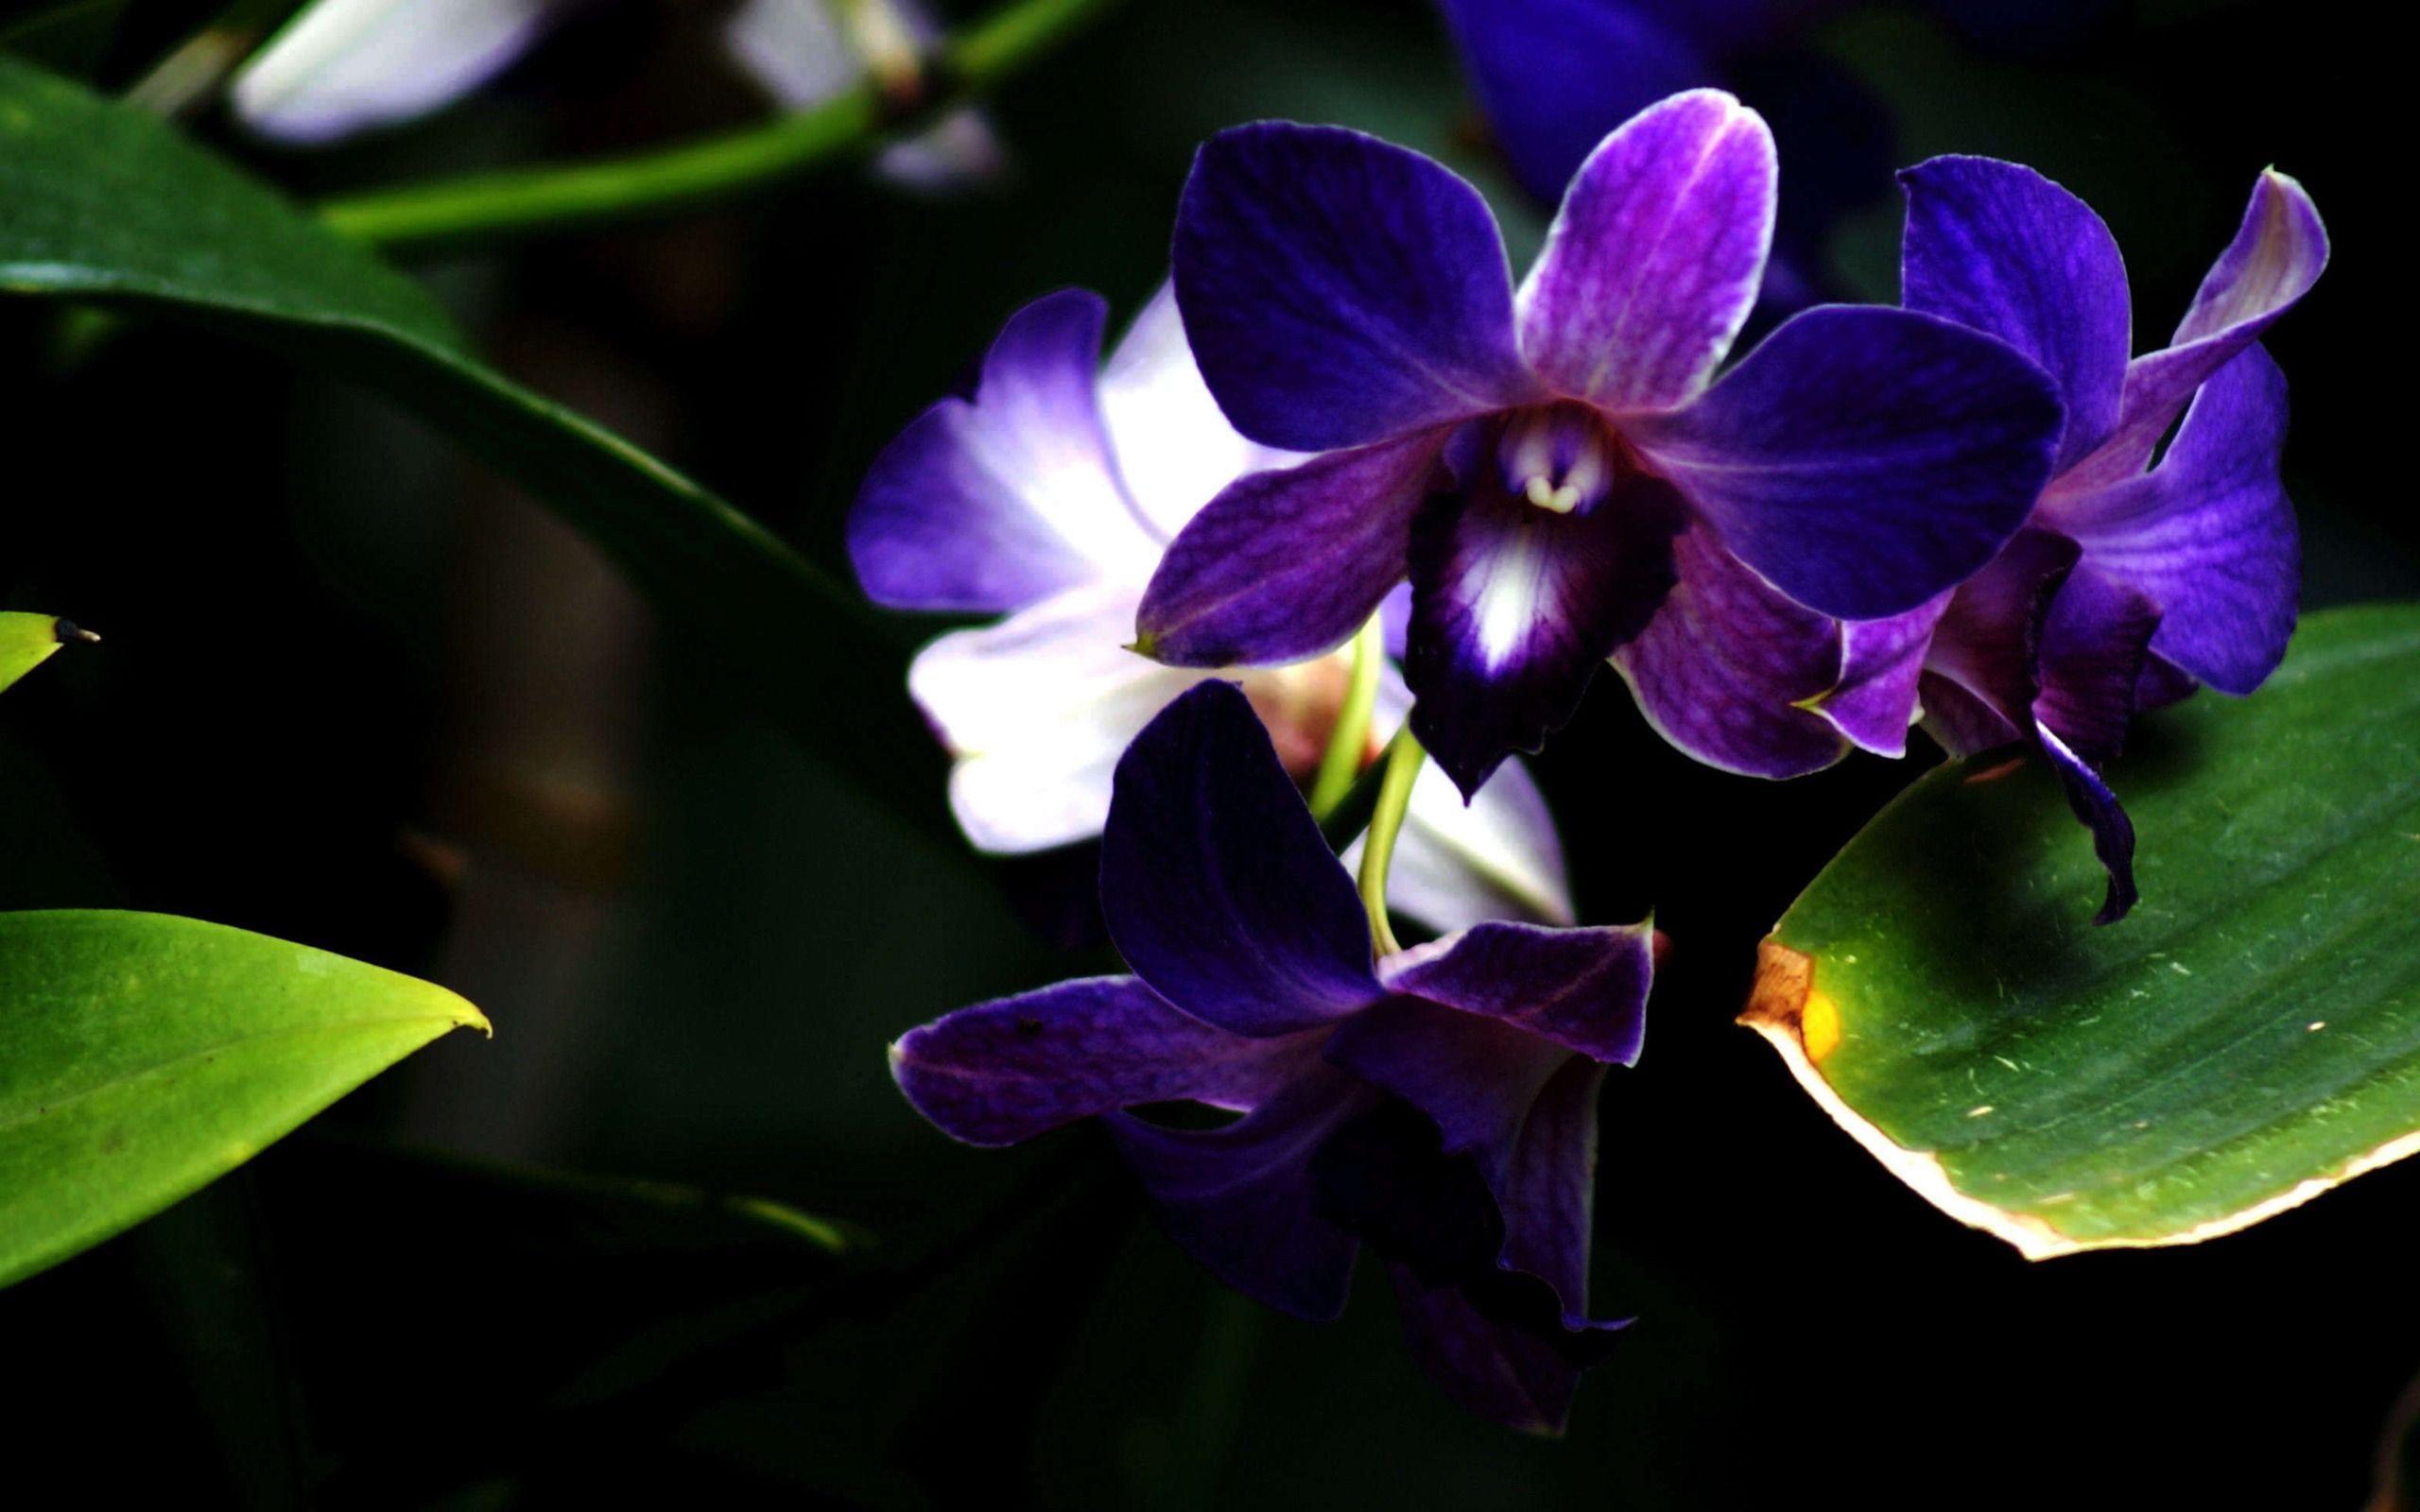 Purple Orchid Flower Photography. HQ Wallpaper for PC